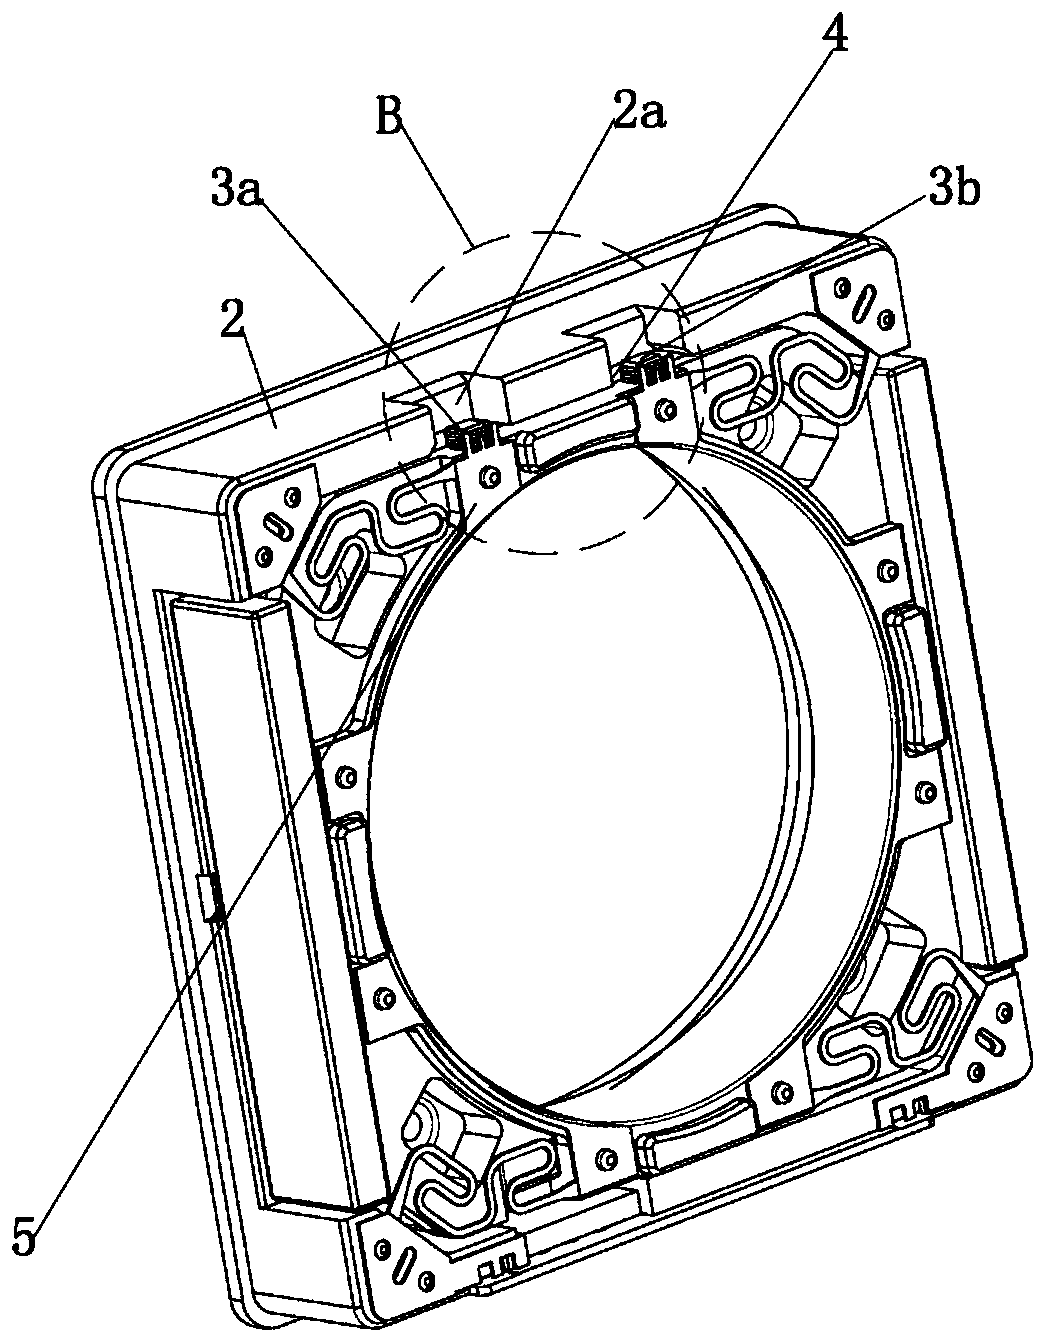 Spring welding structure of motor, winding structure and lens driving motor